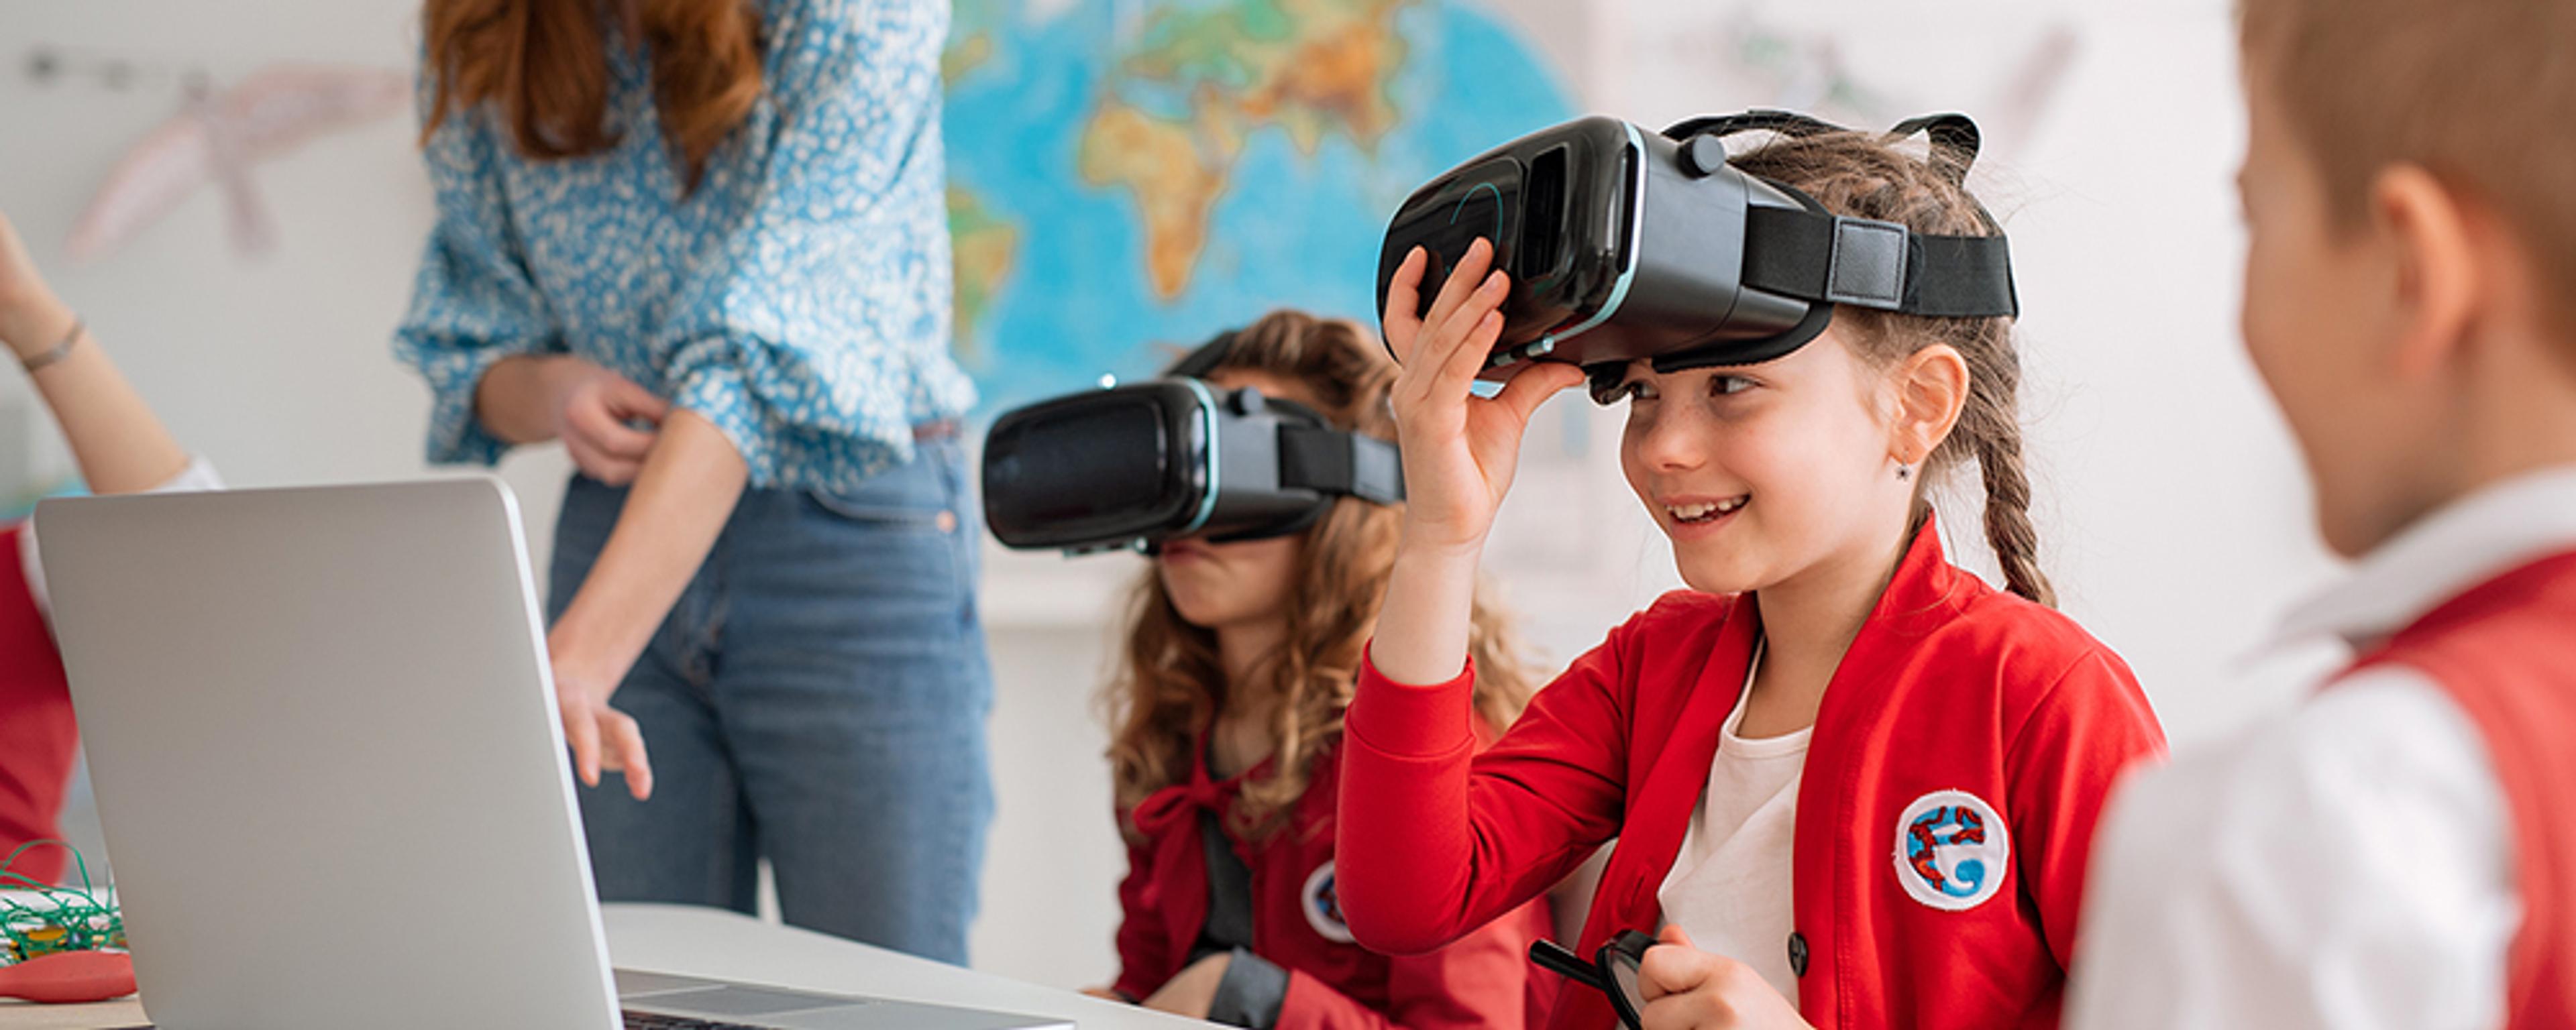 Developing an R&D Strategy to Integrate Immersive Learning Into the Classroom